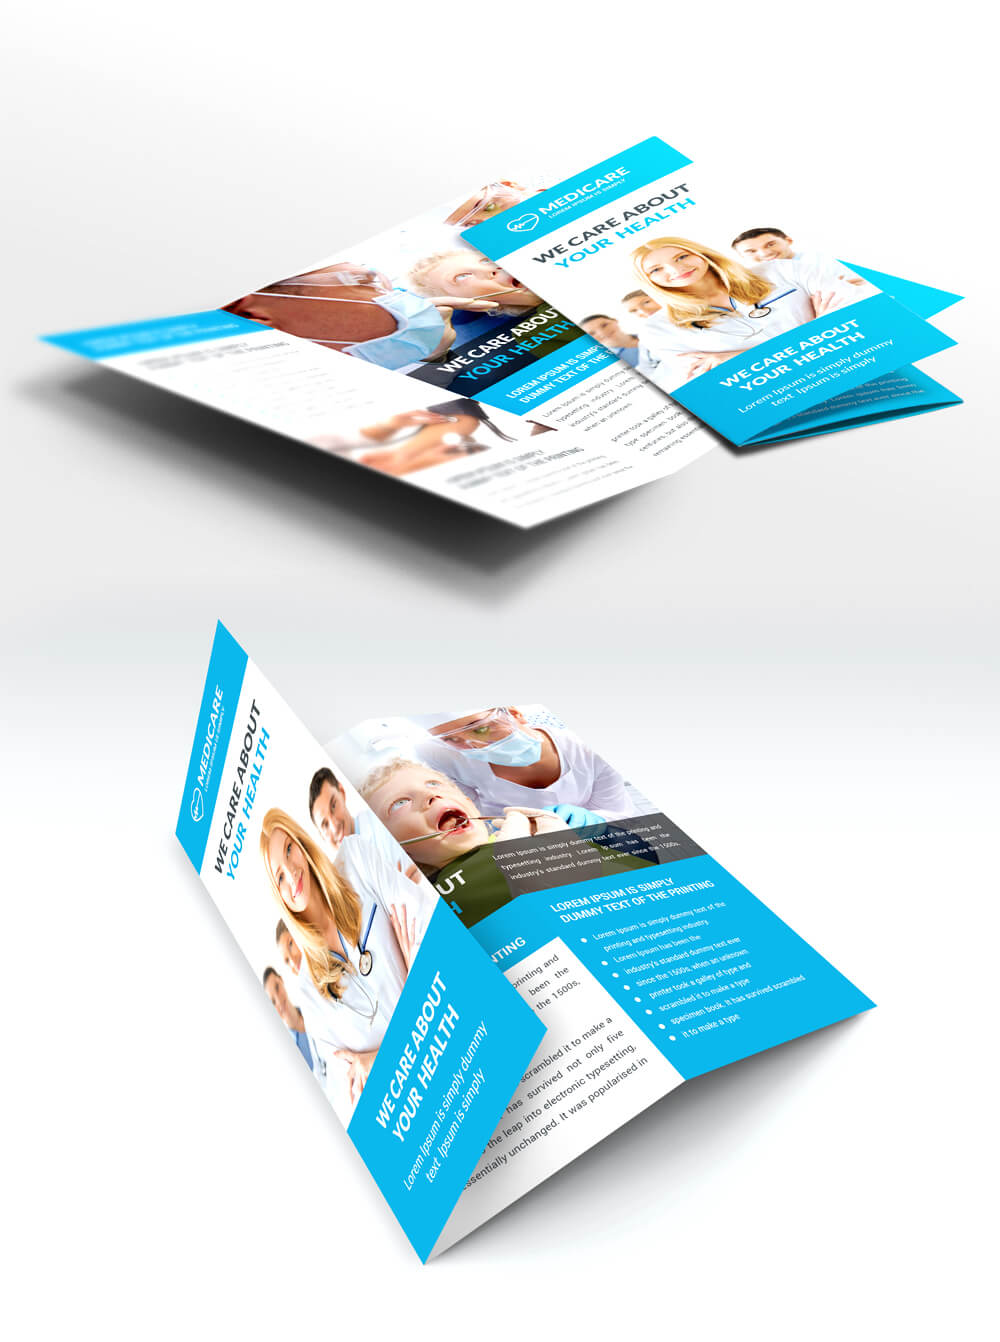 Medical Care And Hospital Trifold Brochure Template Free Psd Regarding Healthcare Brochure Templates Free Download